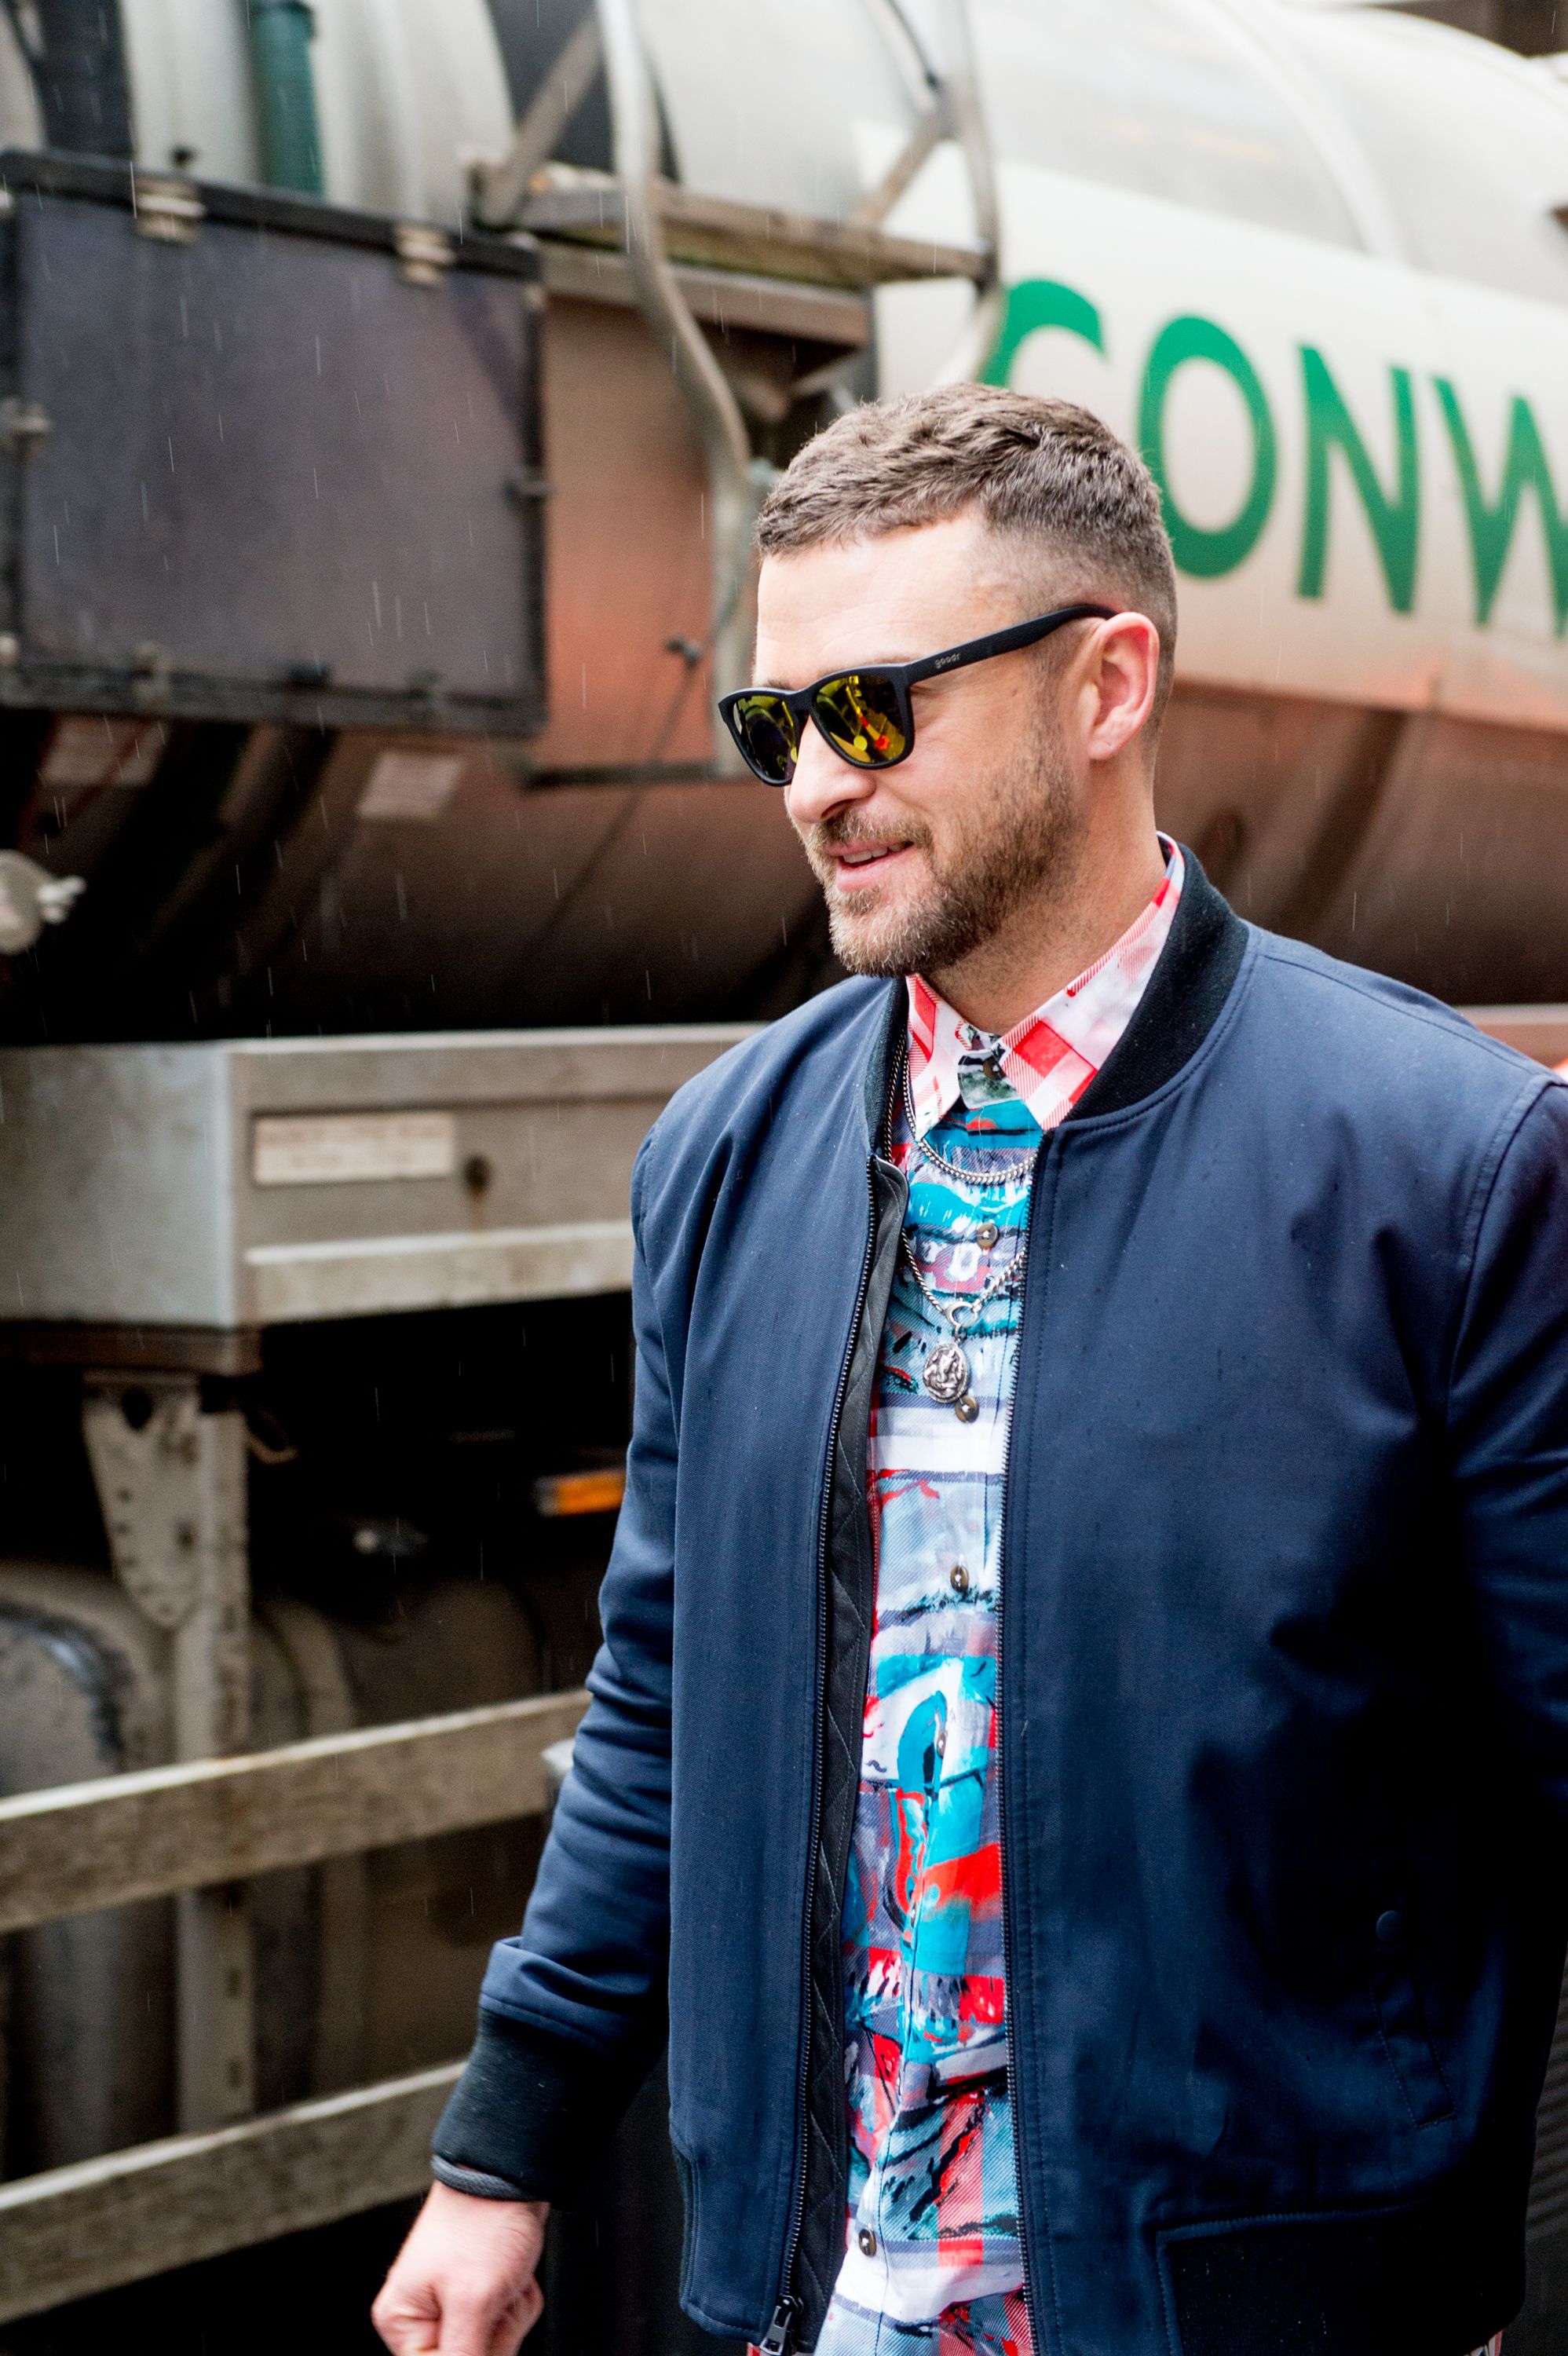 Justin Timberlake Looks Calm and Collected in London After Scandal